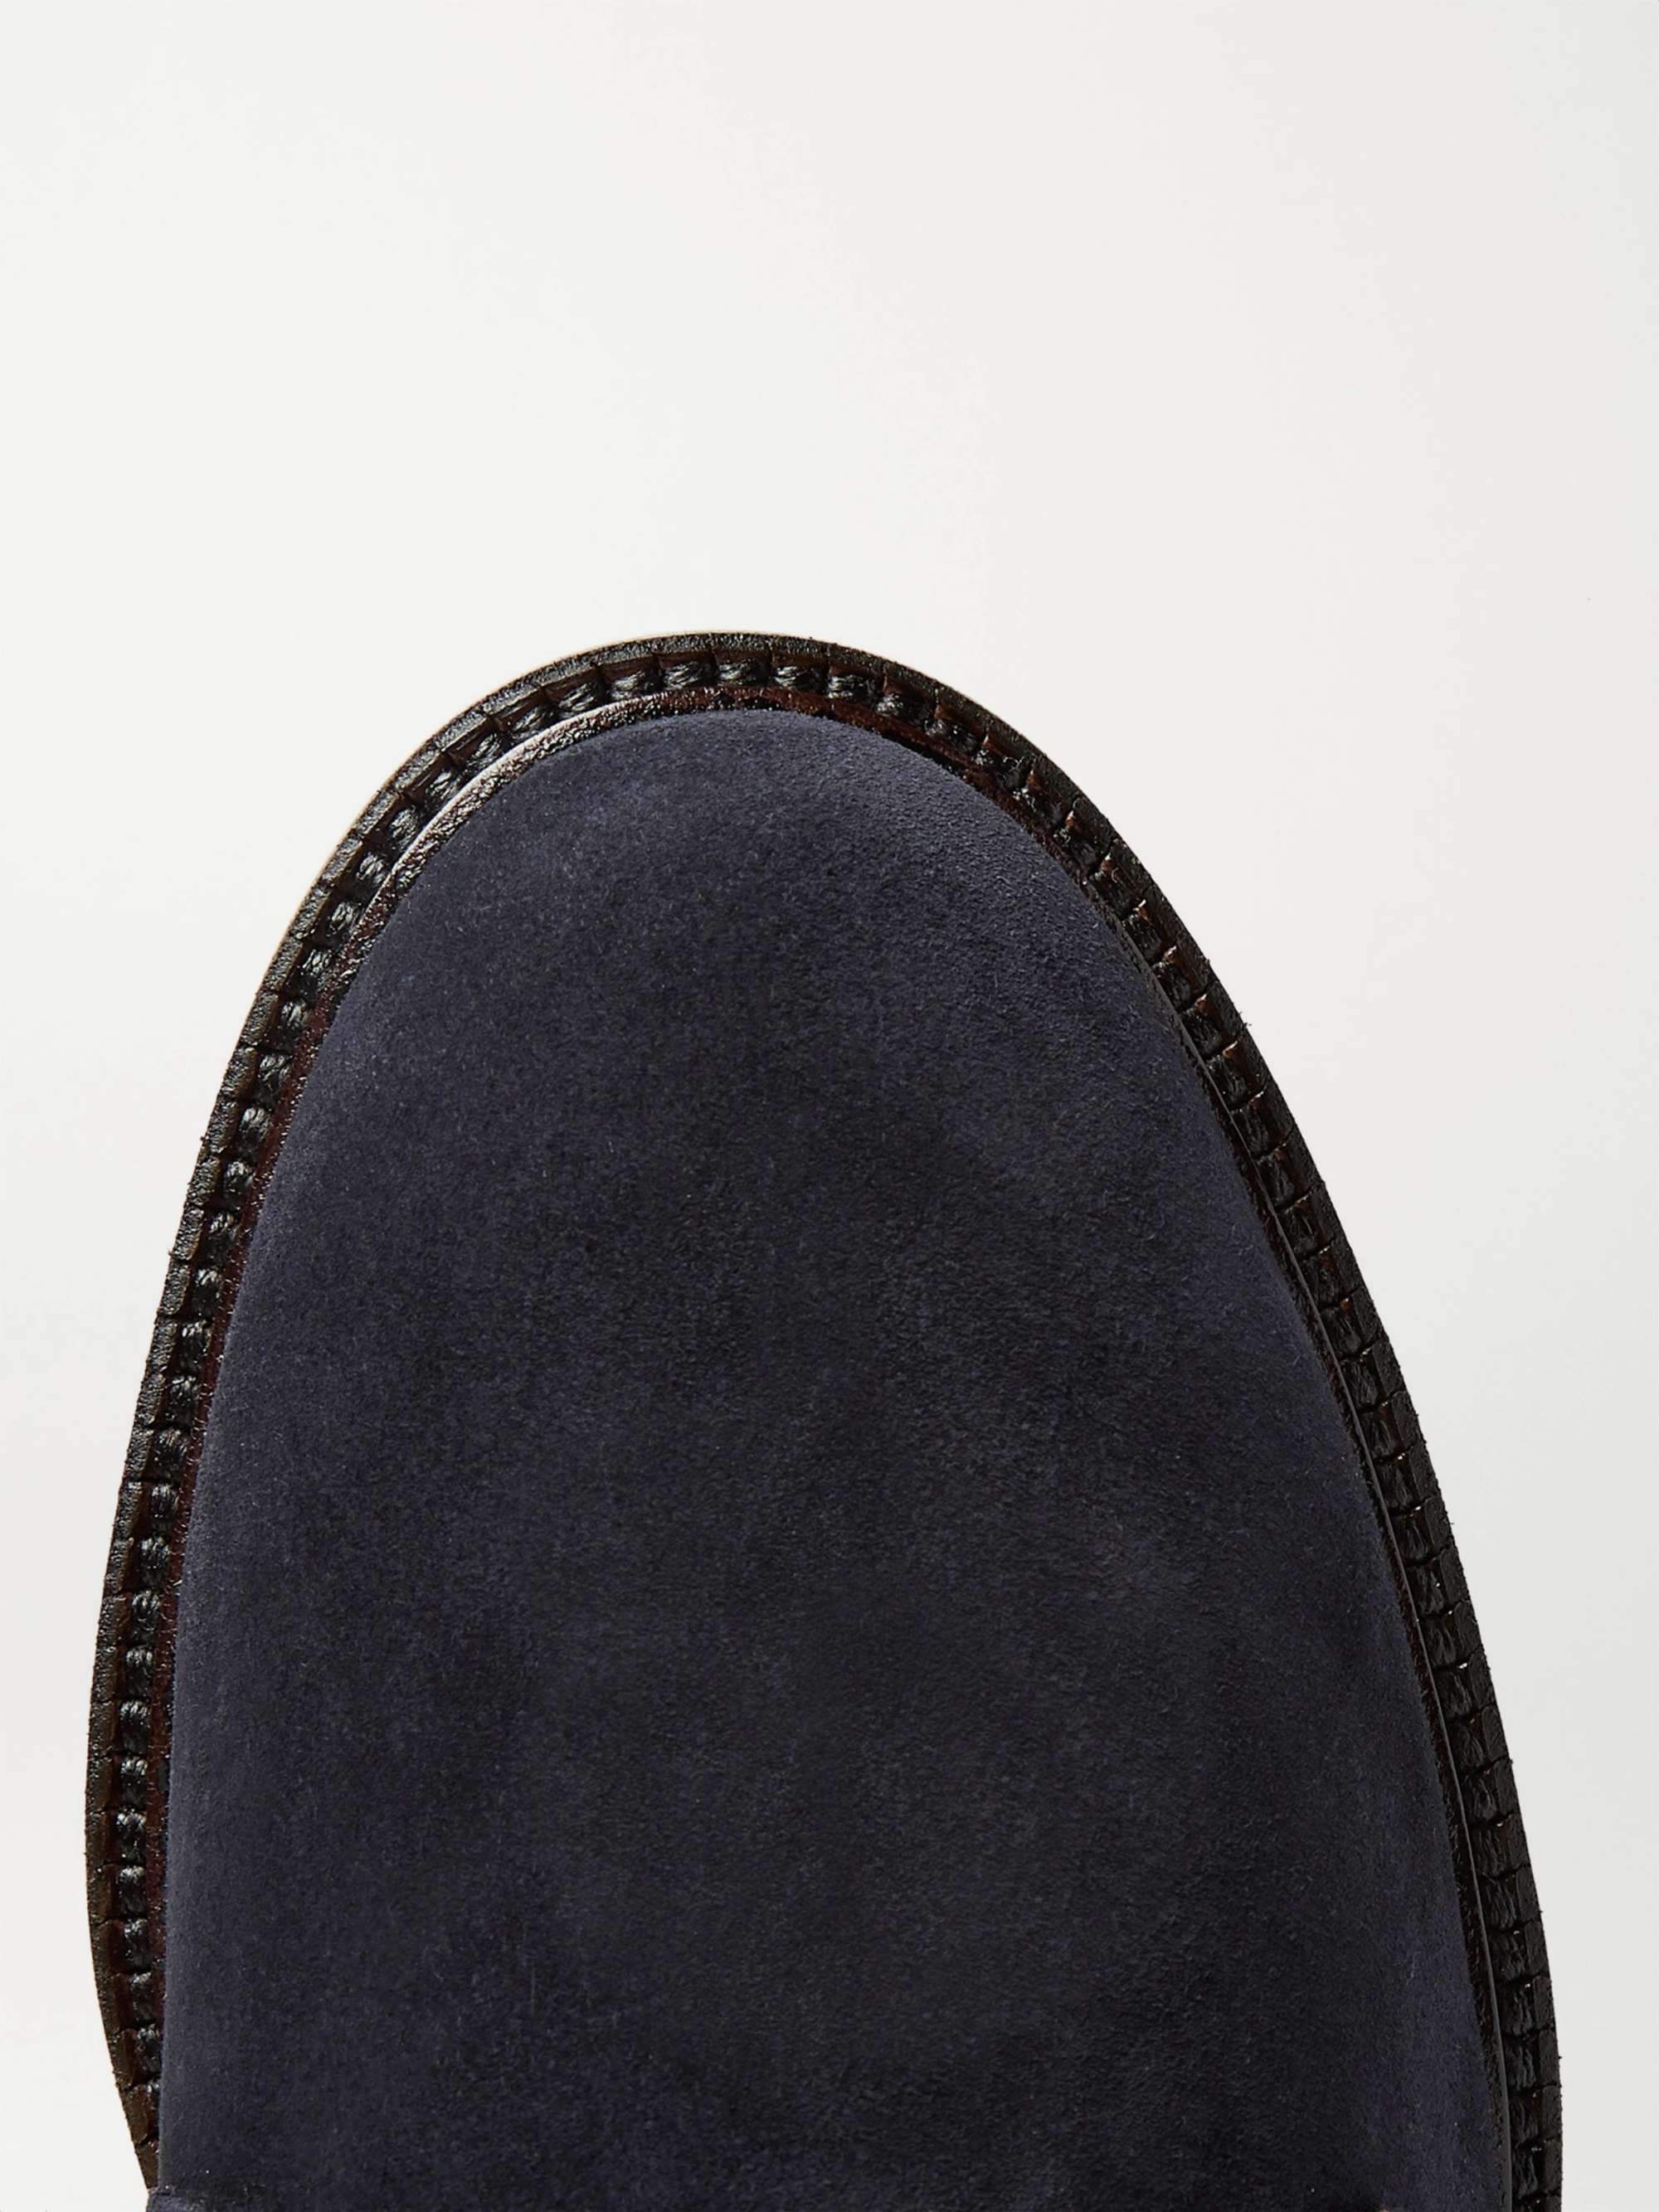 LORO PIANA Icer Walk Cashmere-Lined Water-Repellent Suede Boots